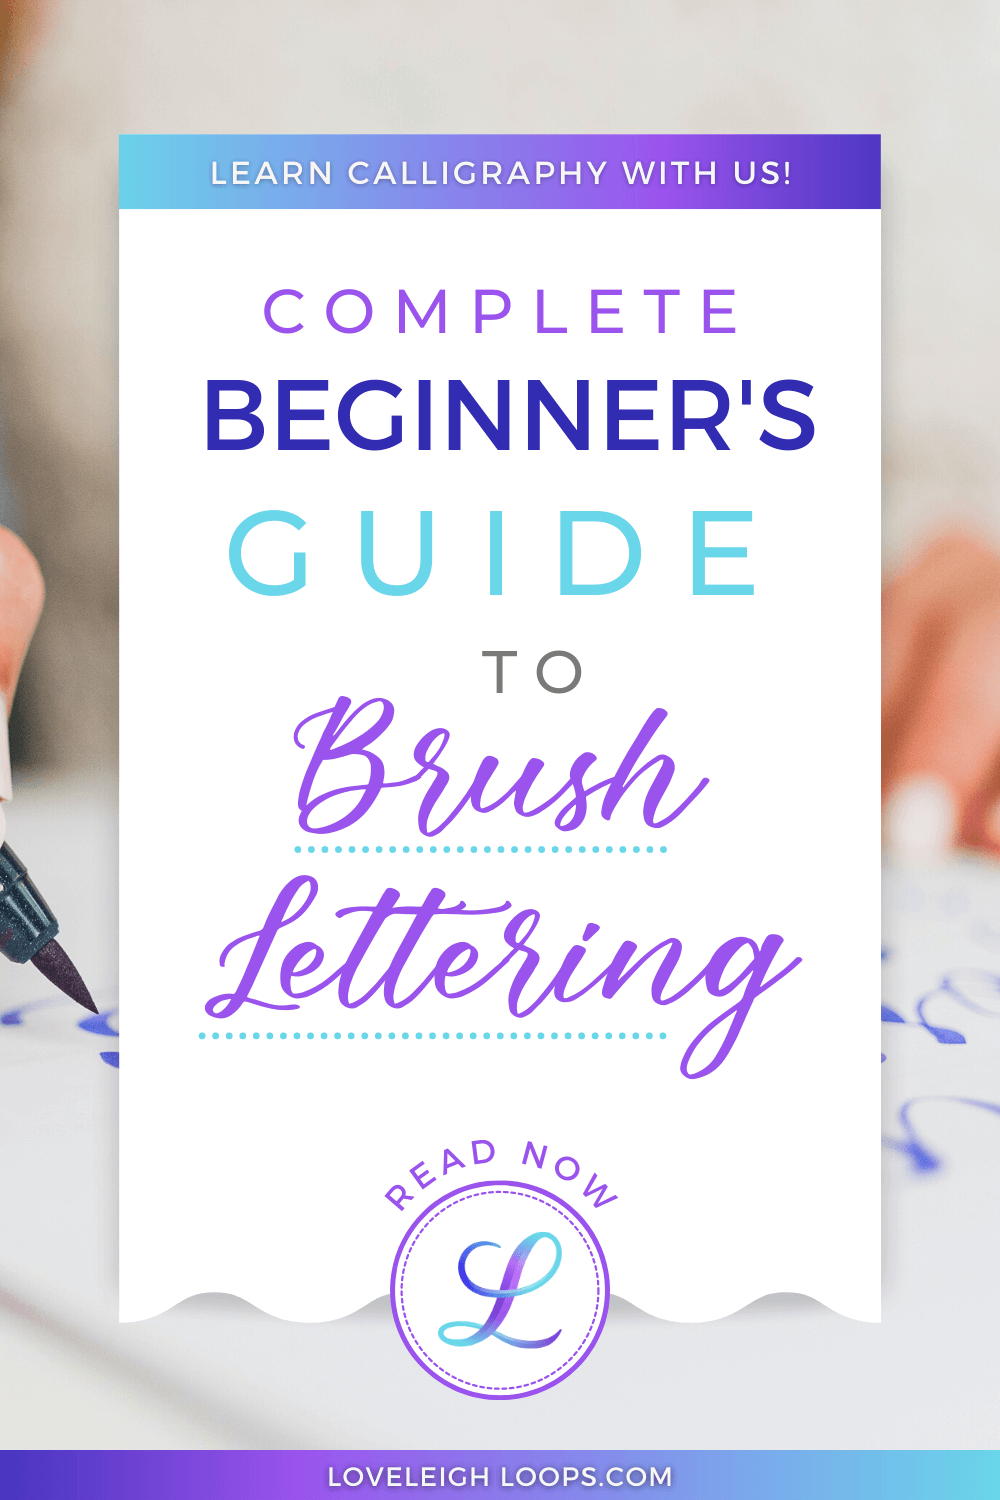 How To: Calligraphy & Hand Lettering for Beginners! Tutorial + Tips! 